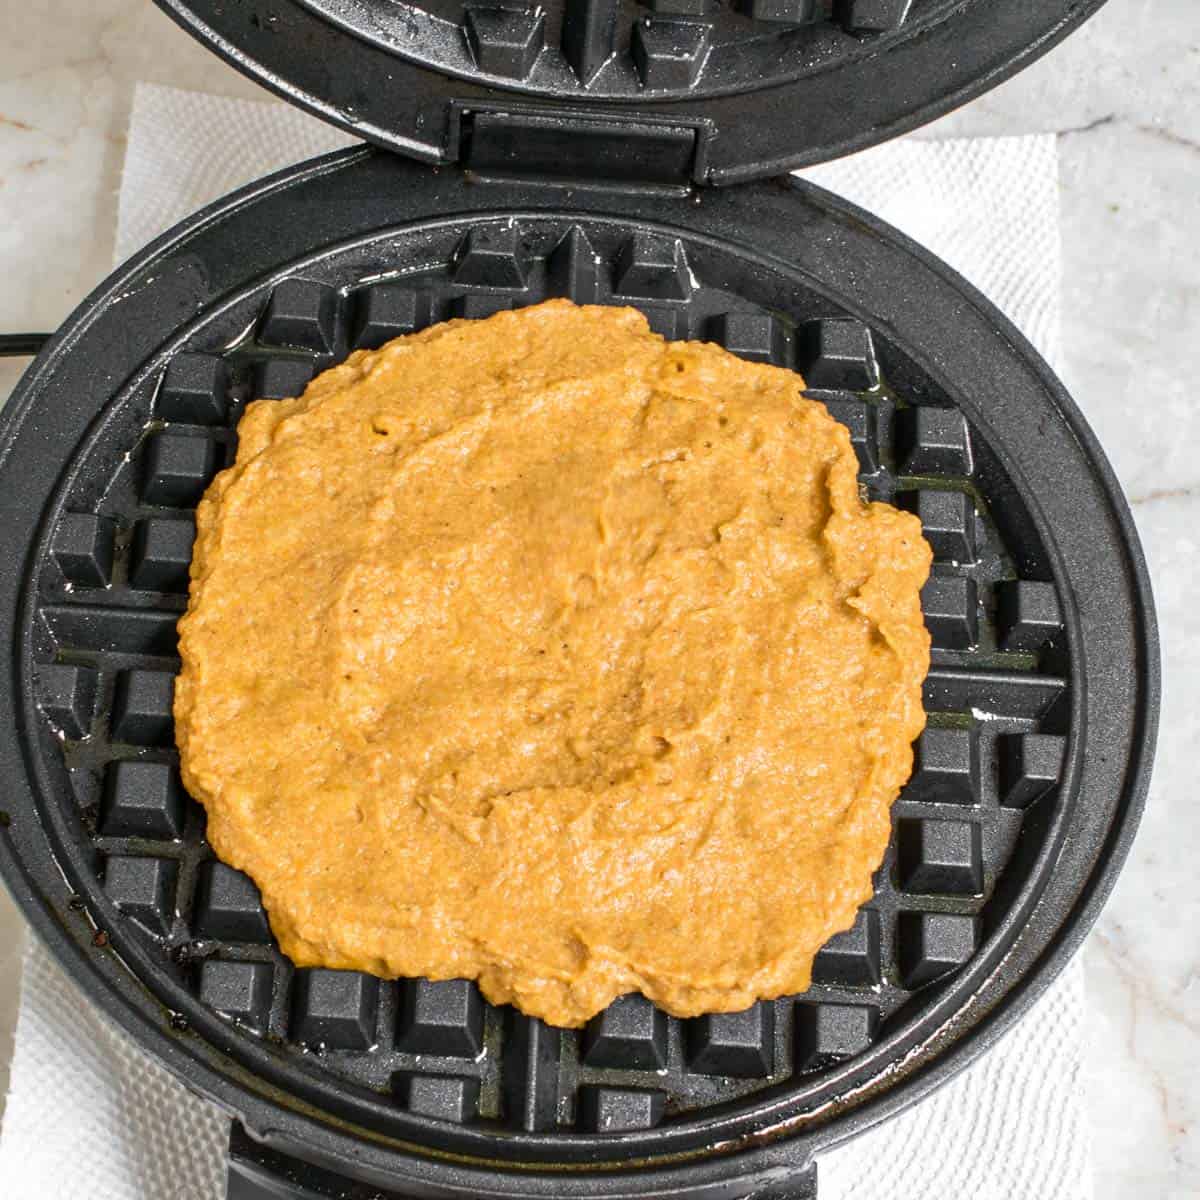 shaped batter in the waffle maker.